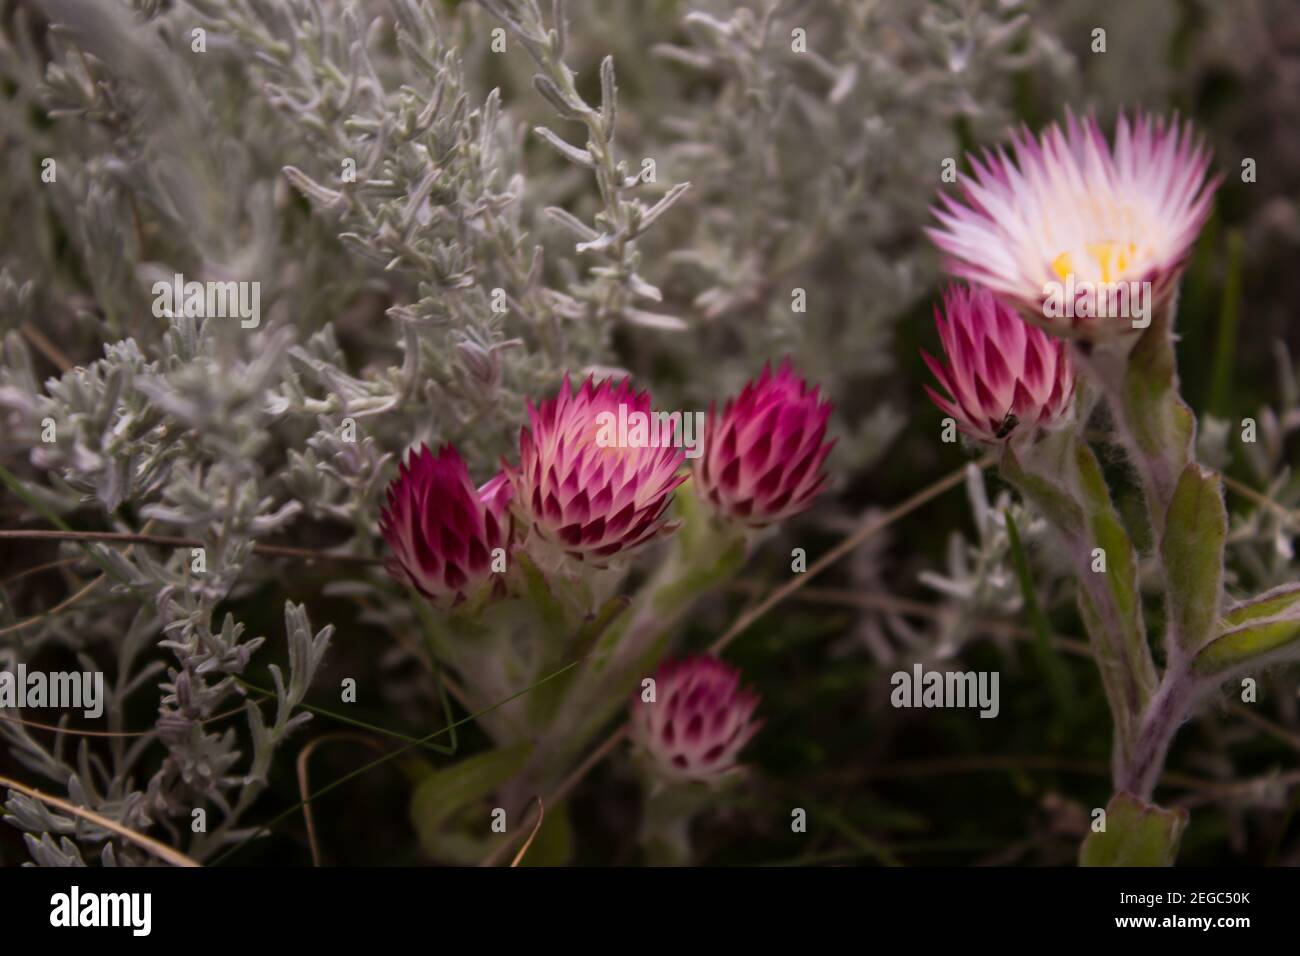 Buds of the pink everlasting, Helichrysum Adenocarpum, with blue-grey vegetation in the background, in the Drakensberg Mountains of South Africa Stock Photo